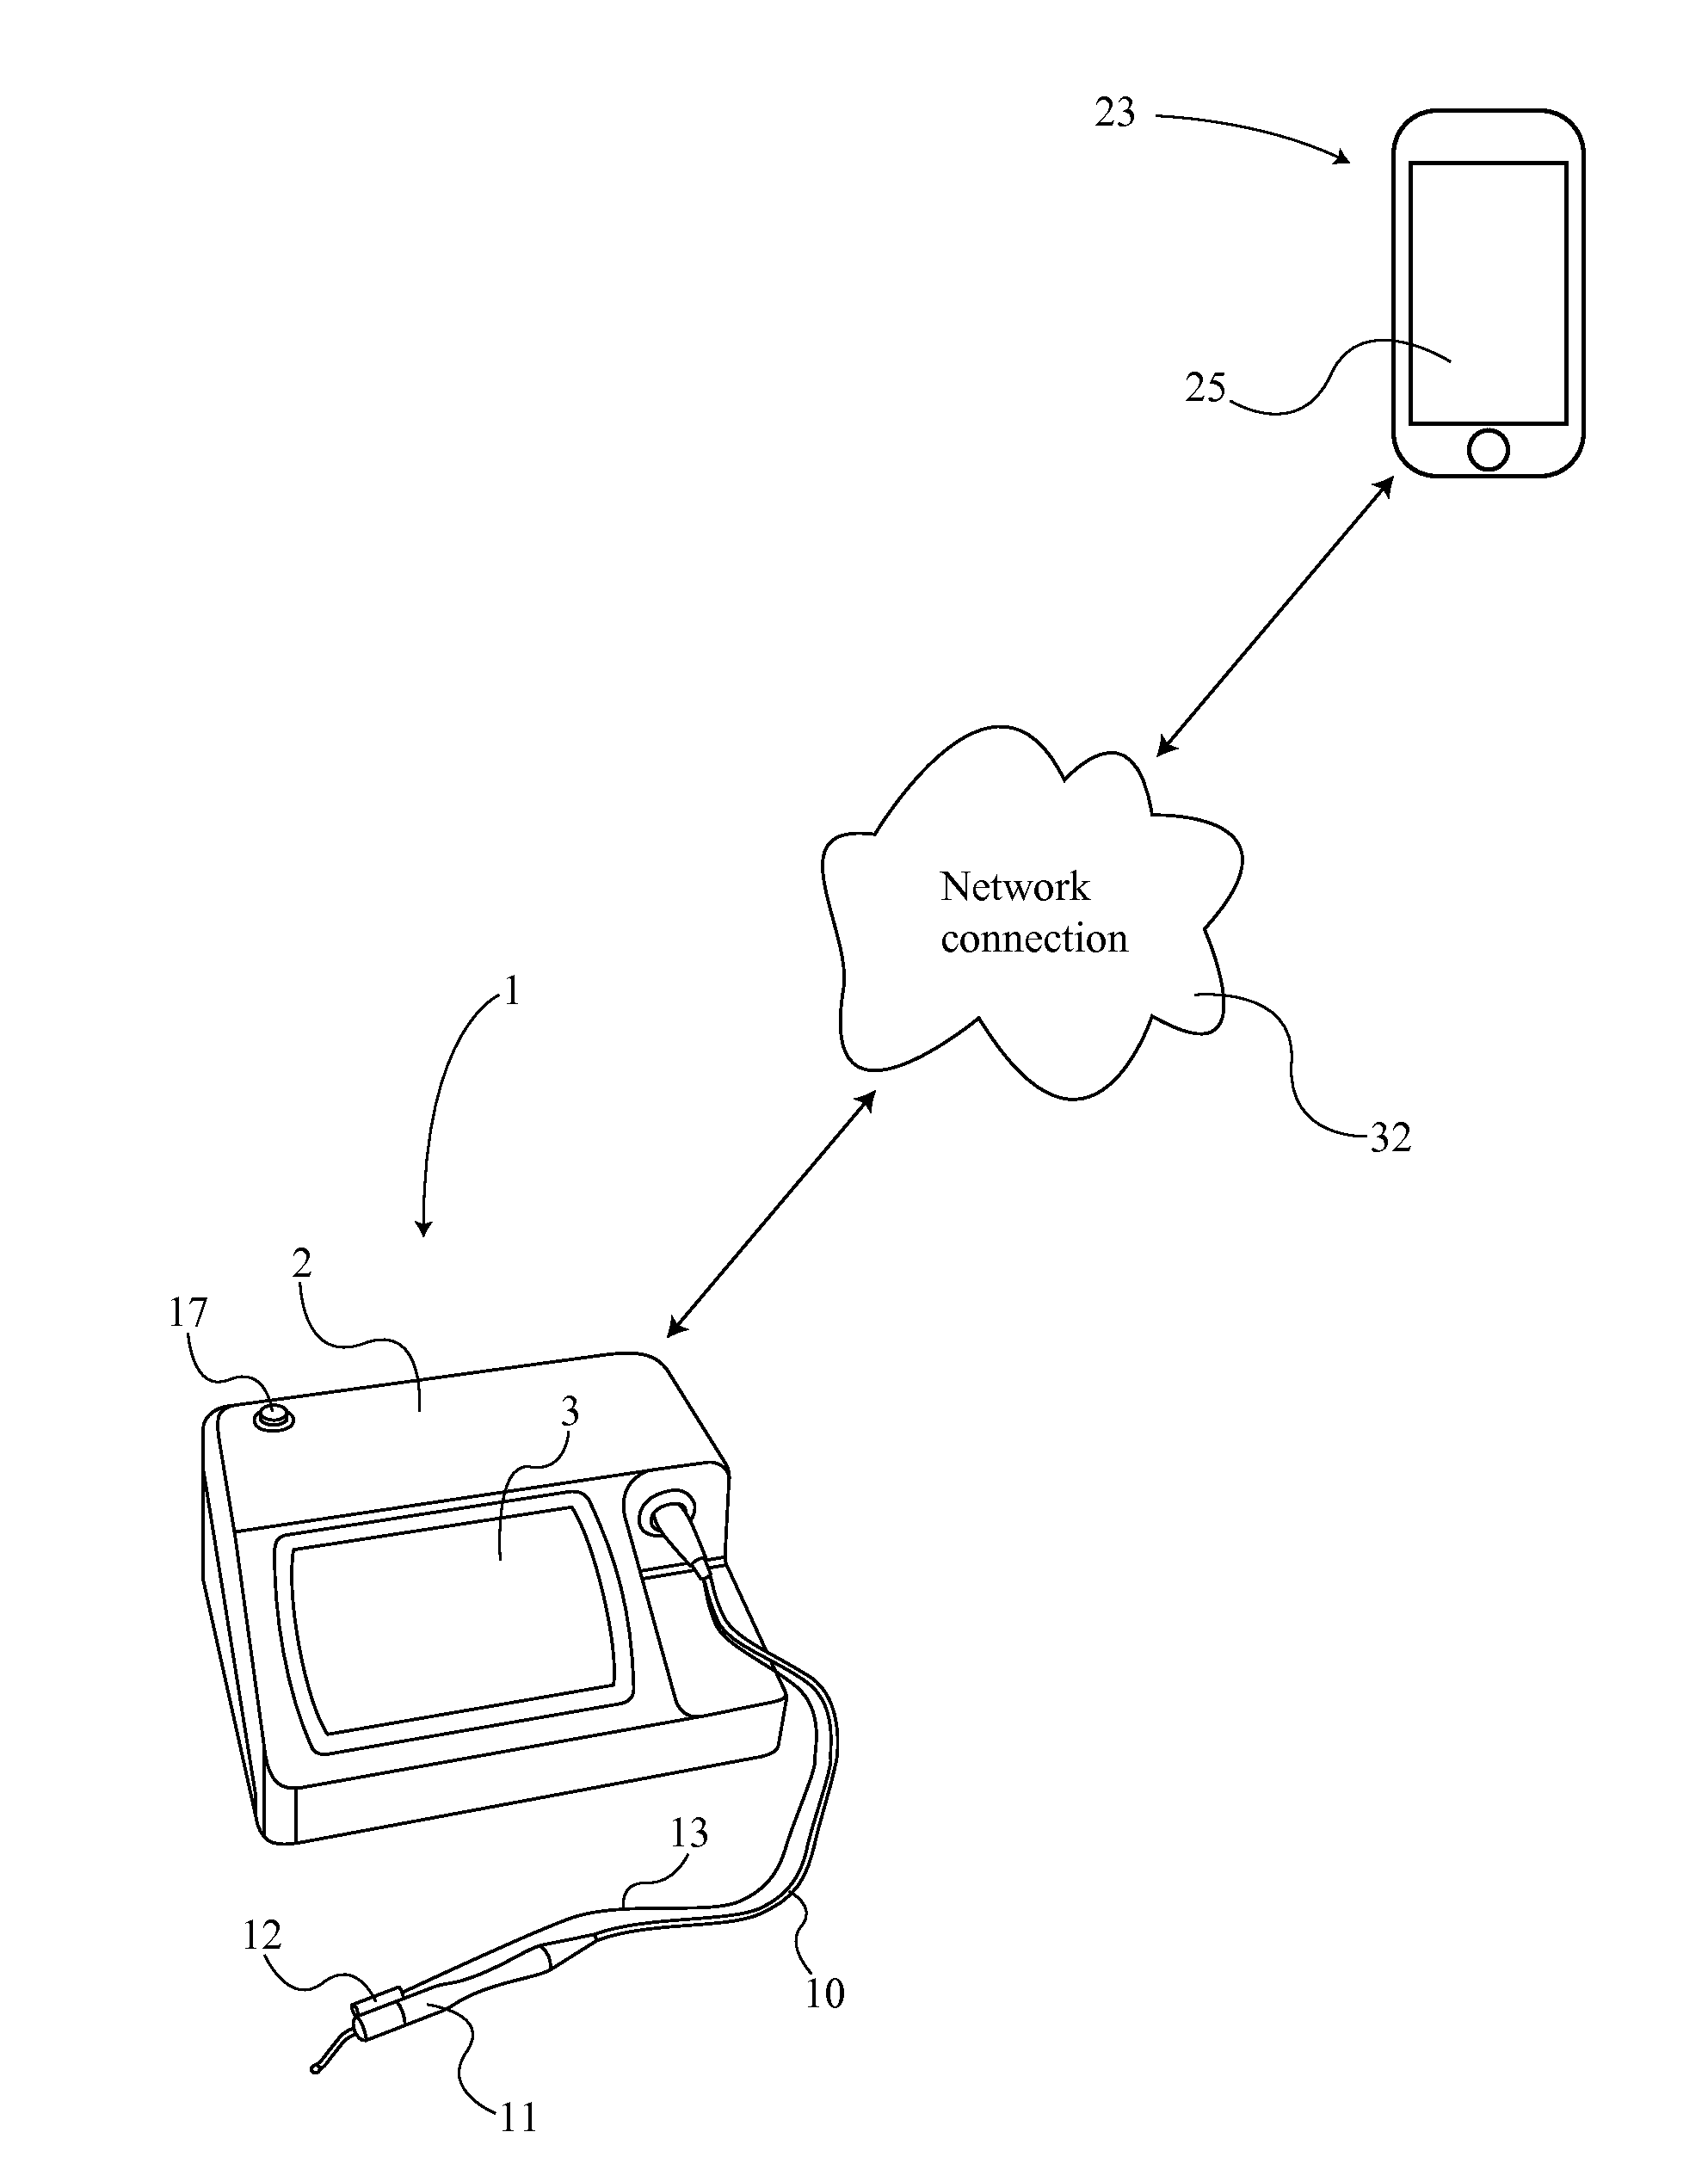 System of Remote Controlling a Medical Laser Generator Unit with a Portable Computing Device